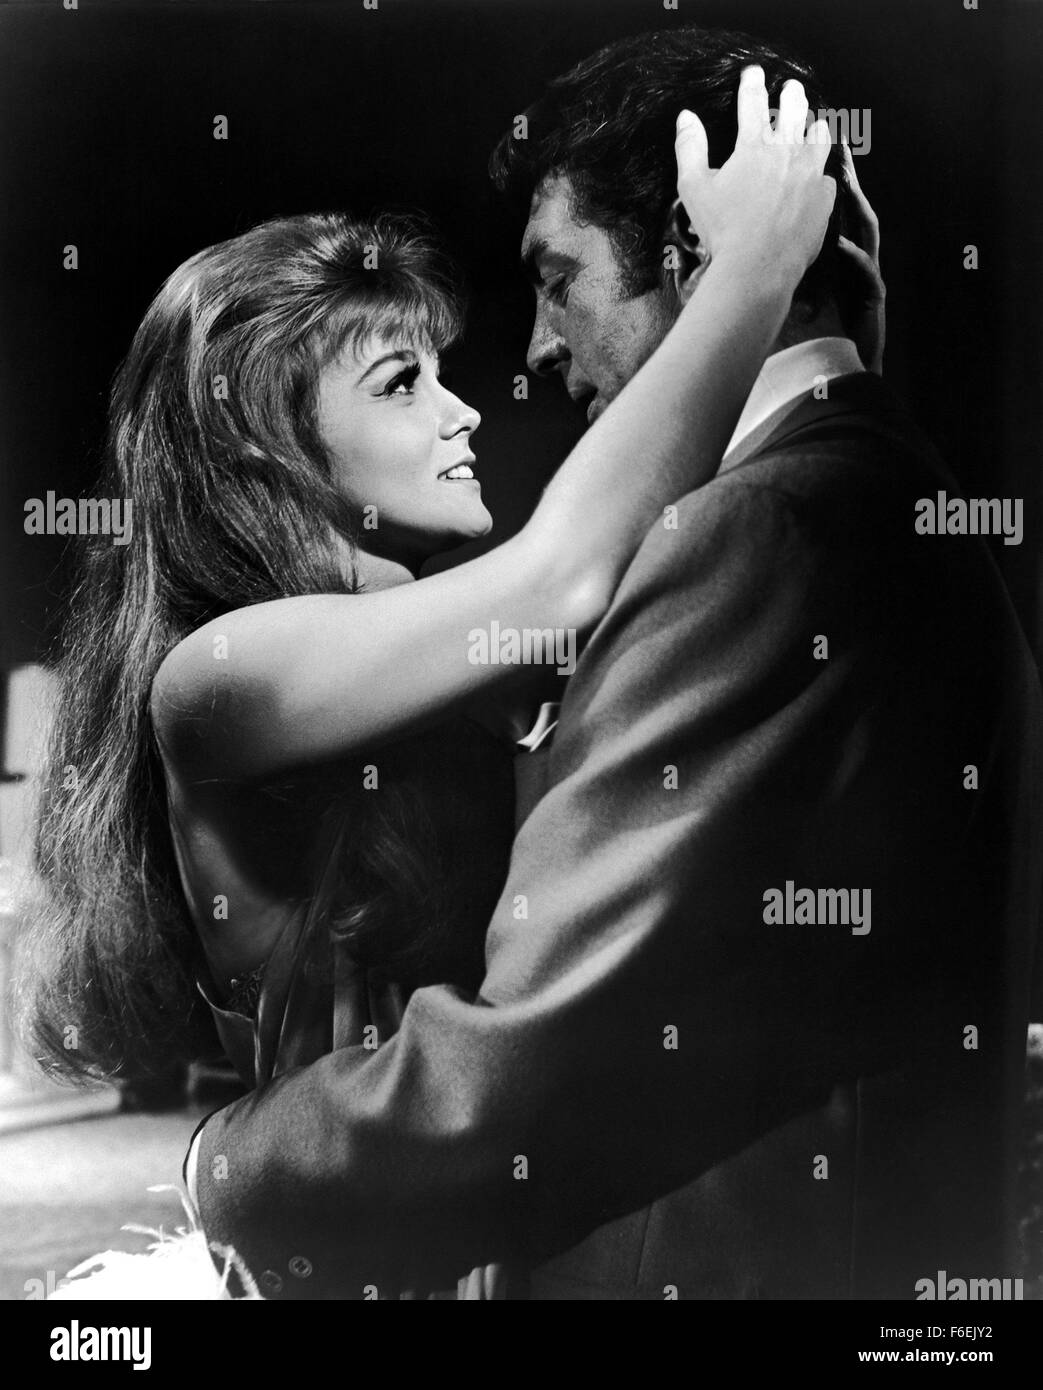 Dec 20, 1966; Monte Carlo, MONACO; ANN-MARGRET as Suzie Solaris and DEAN MARTIN as Matt Helm in the action, adventure, drama film 'Murderers' Row' directed by Henry Levin. Stock Photo